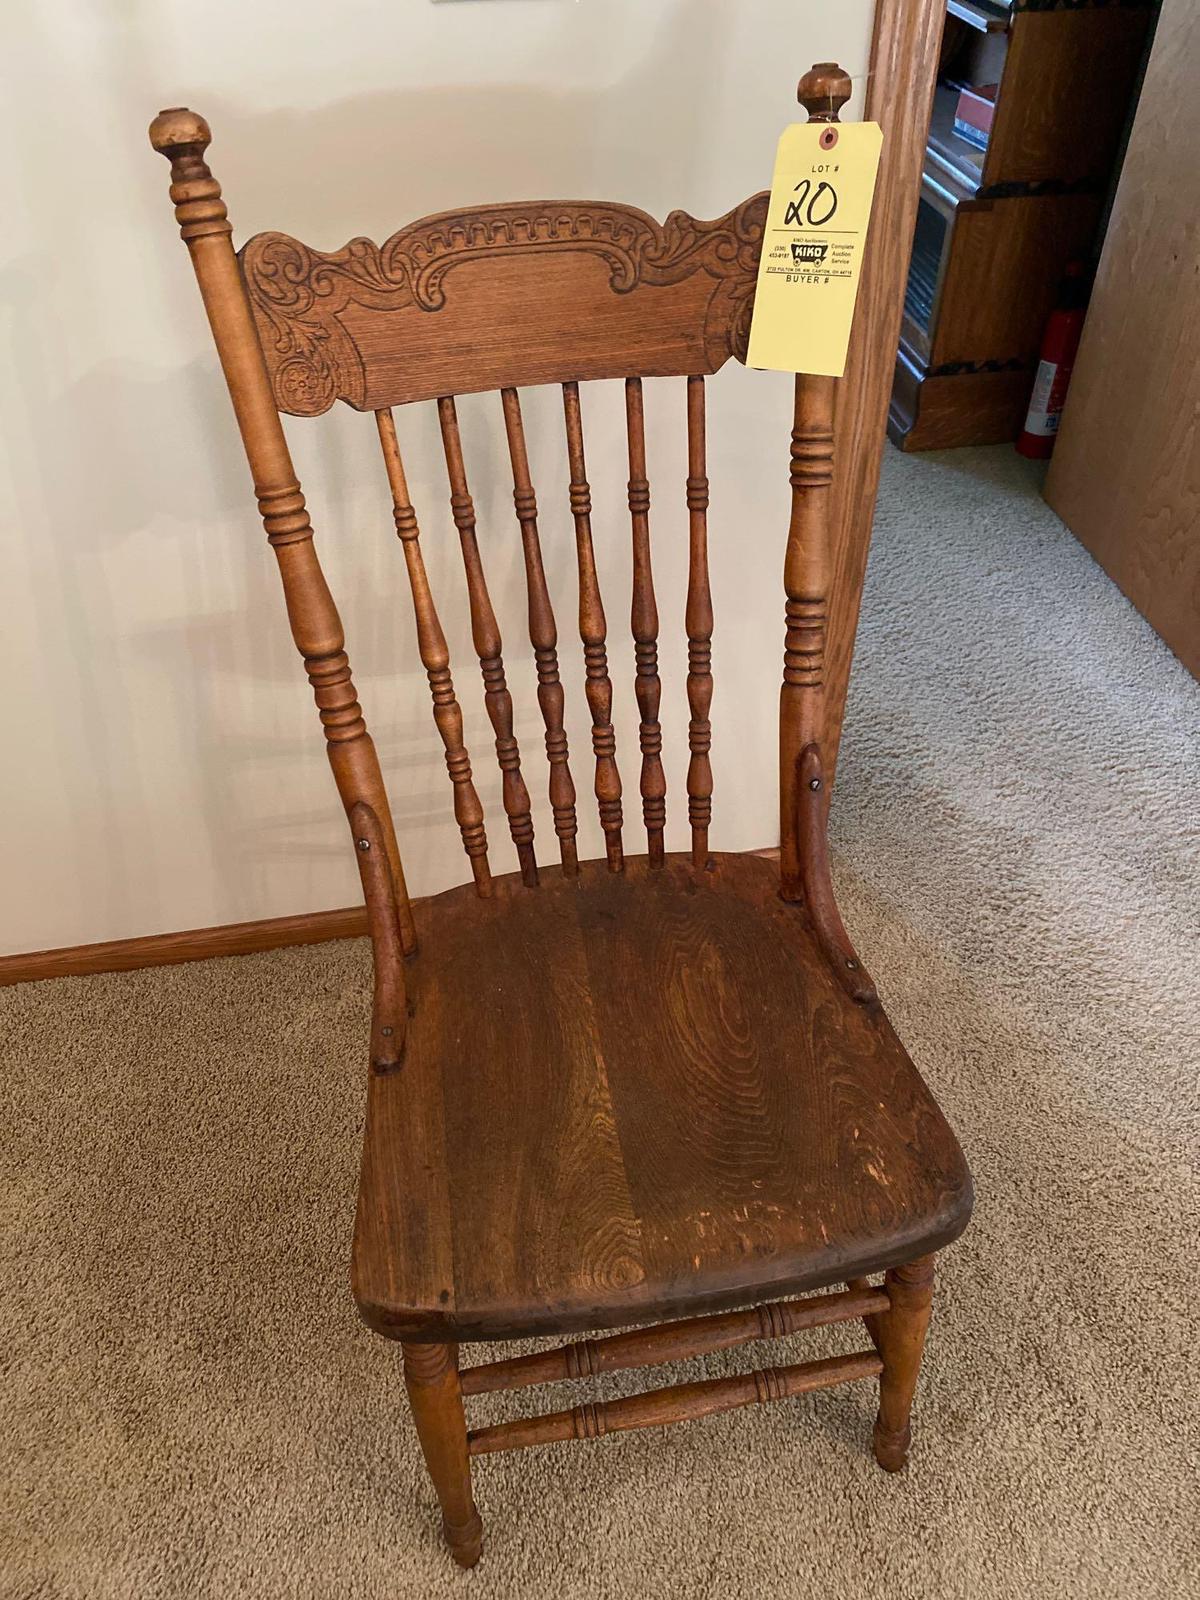 Early pressed-back chair